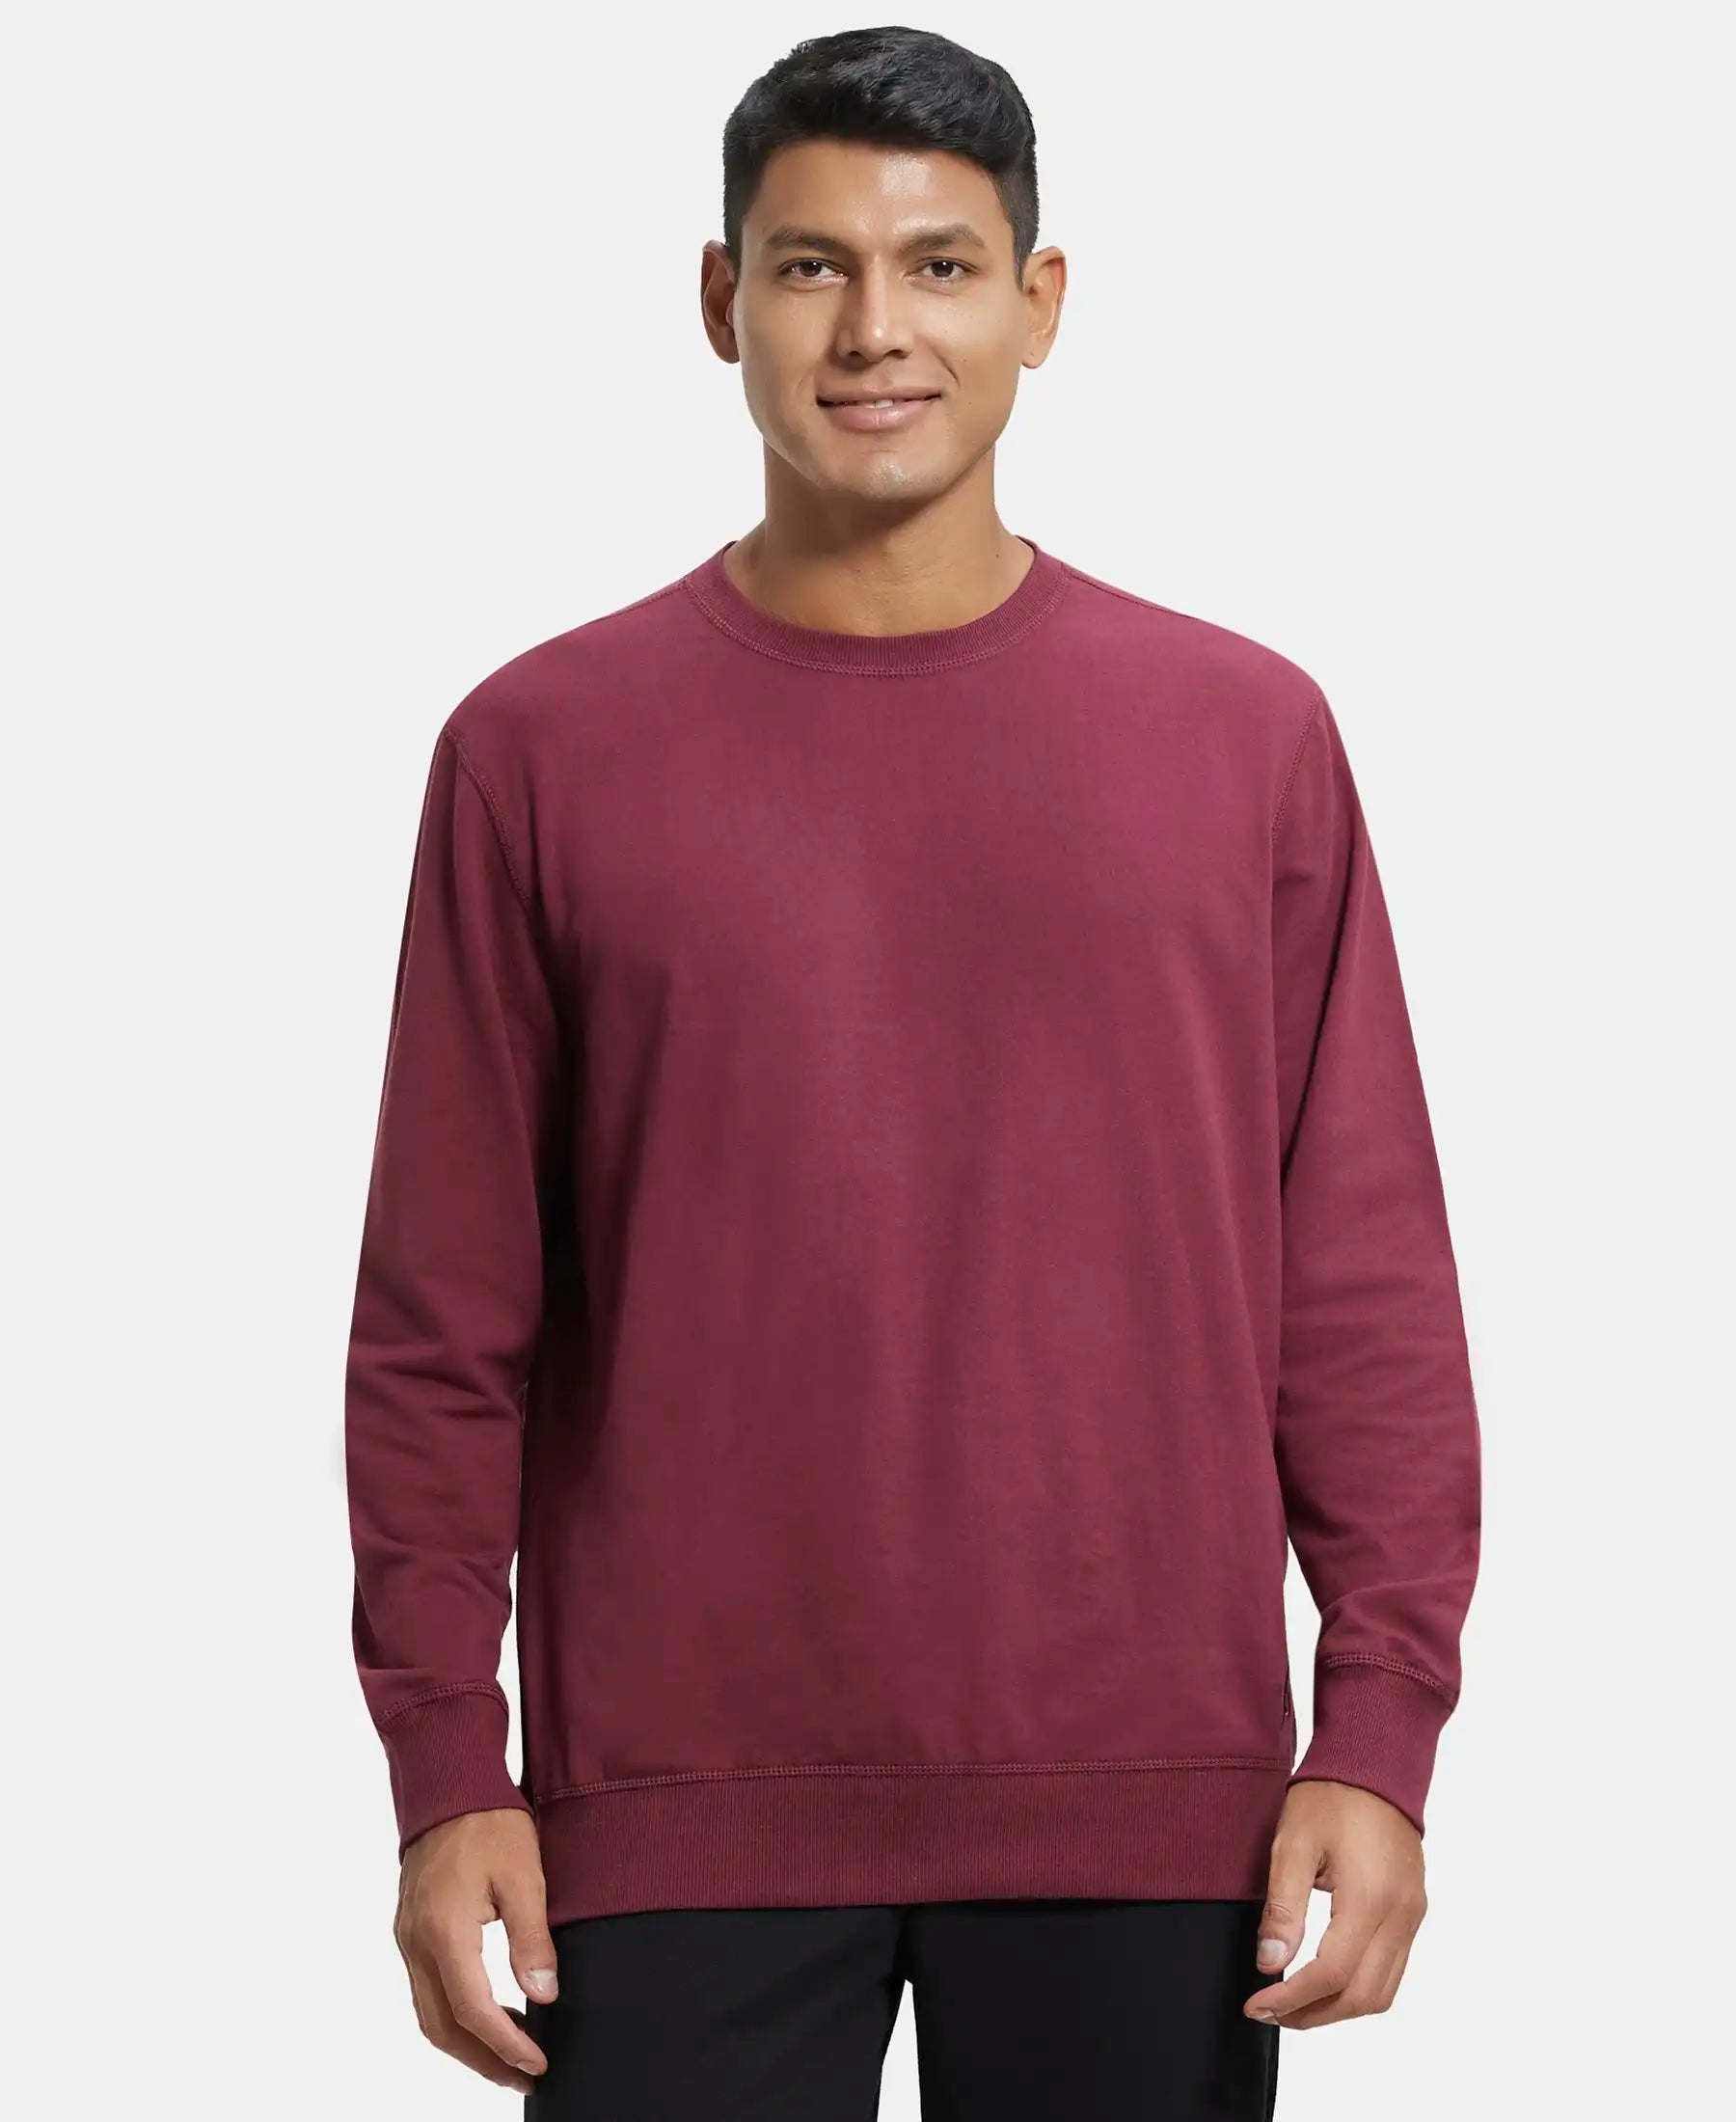 Buy Jockey 2716 Men's Super Combed Cotton French Terry Solid Sweatshirt  with Ribbed Cuffs_Black_S at